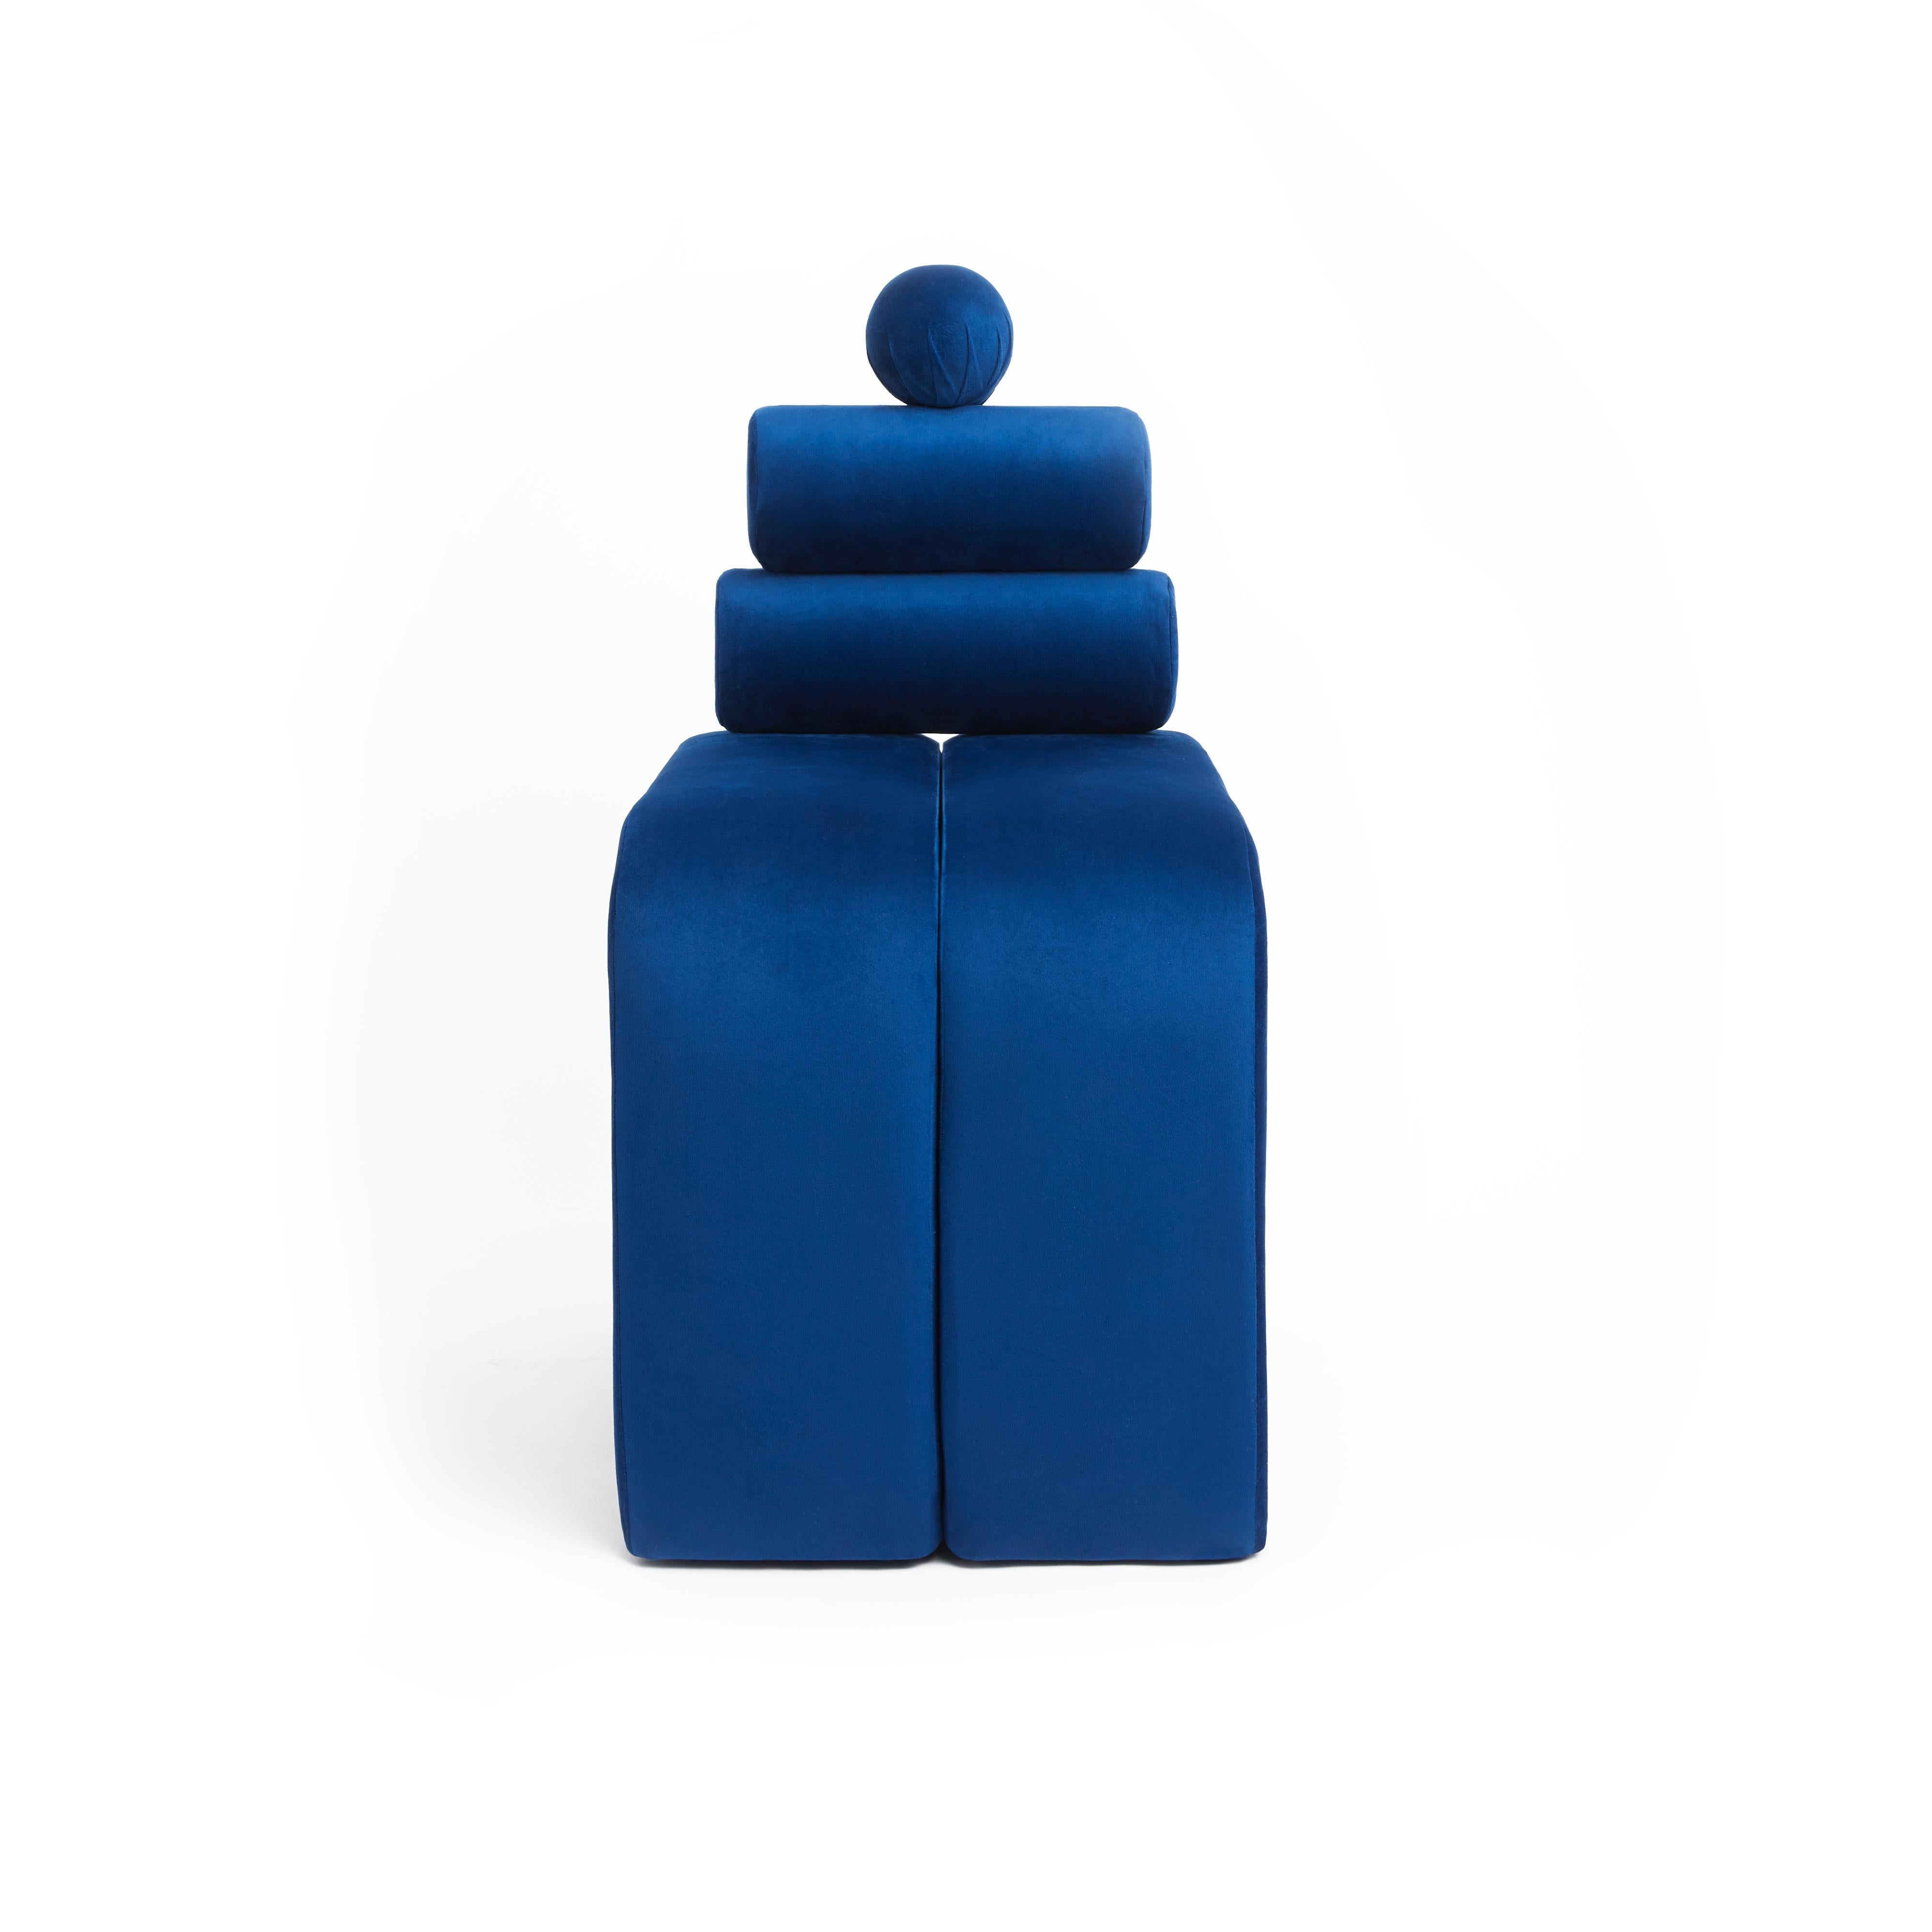 The Klein Seat is designed with inspiration from conceptual artist Yves Klein who questioned the spiritual powers and the immaterial with the use of colour blue. Our abstraction references “Anthropometry of the Blue Period (ANT 82).”

Klein is a